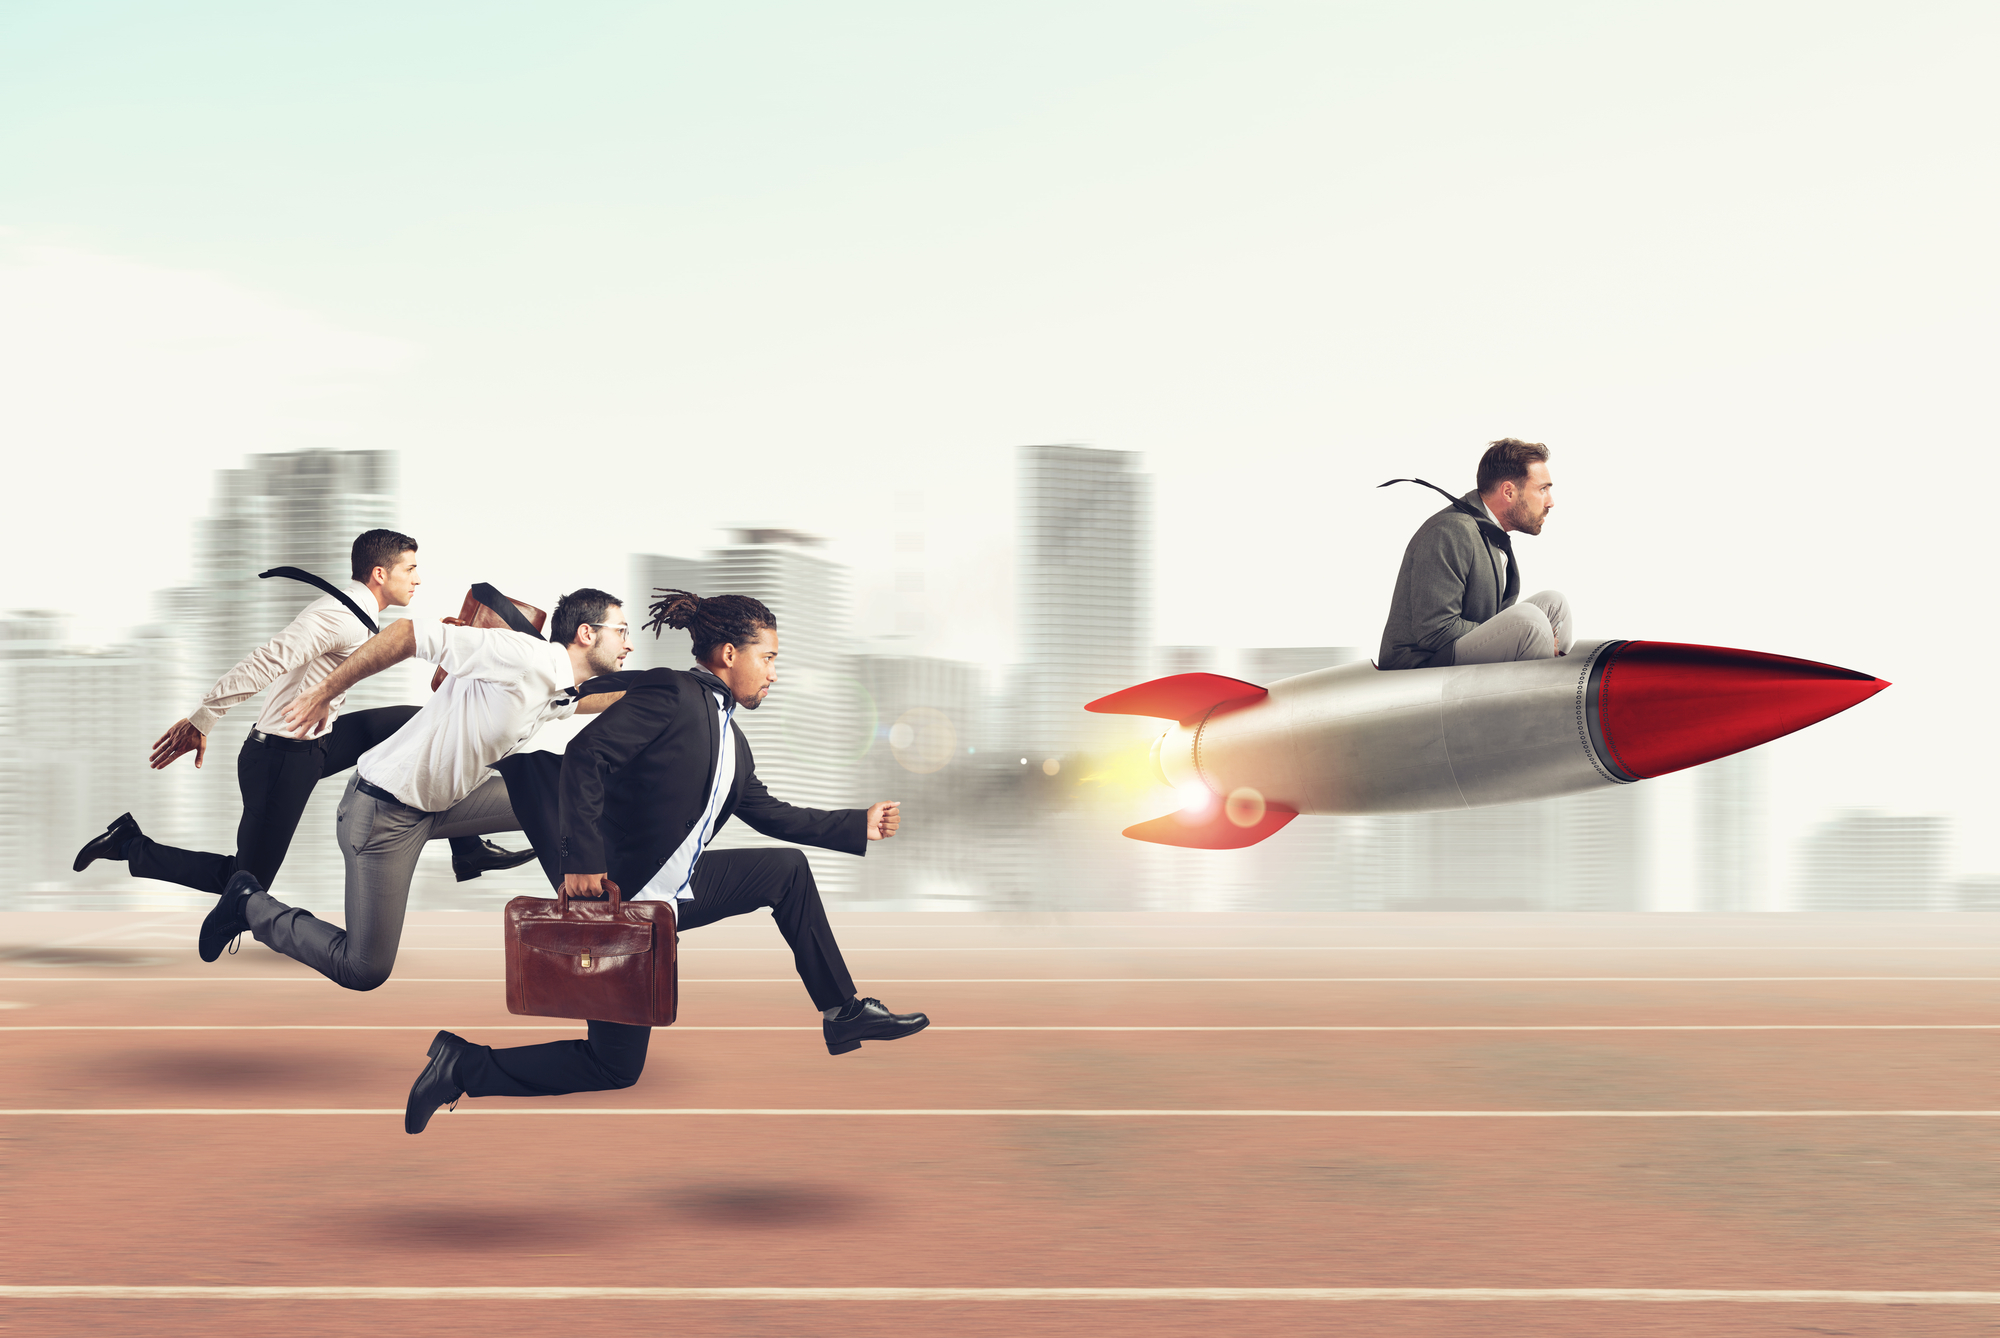 Businessman on rocket, three competitors chasing behind on a racetrack.